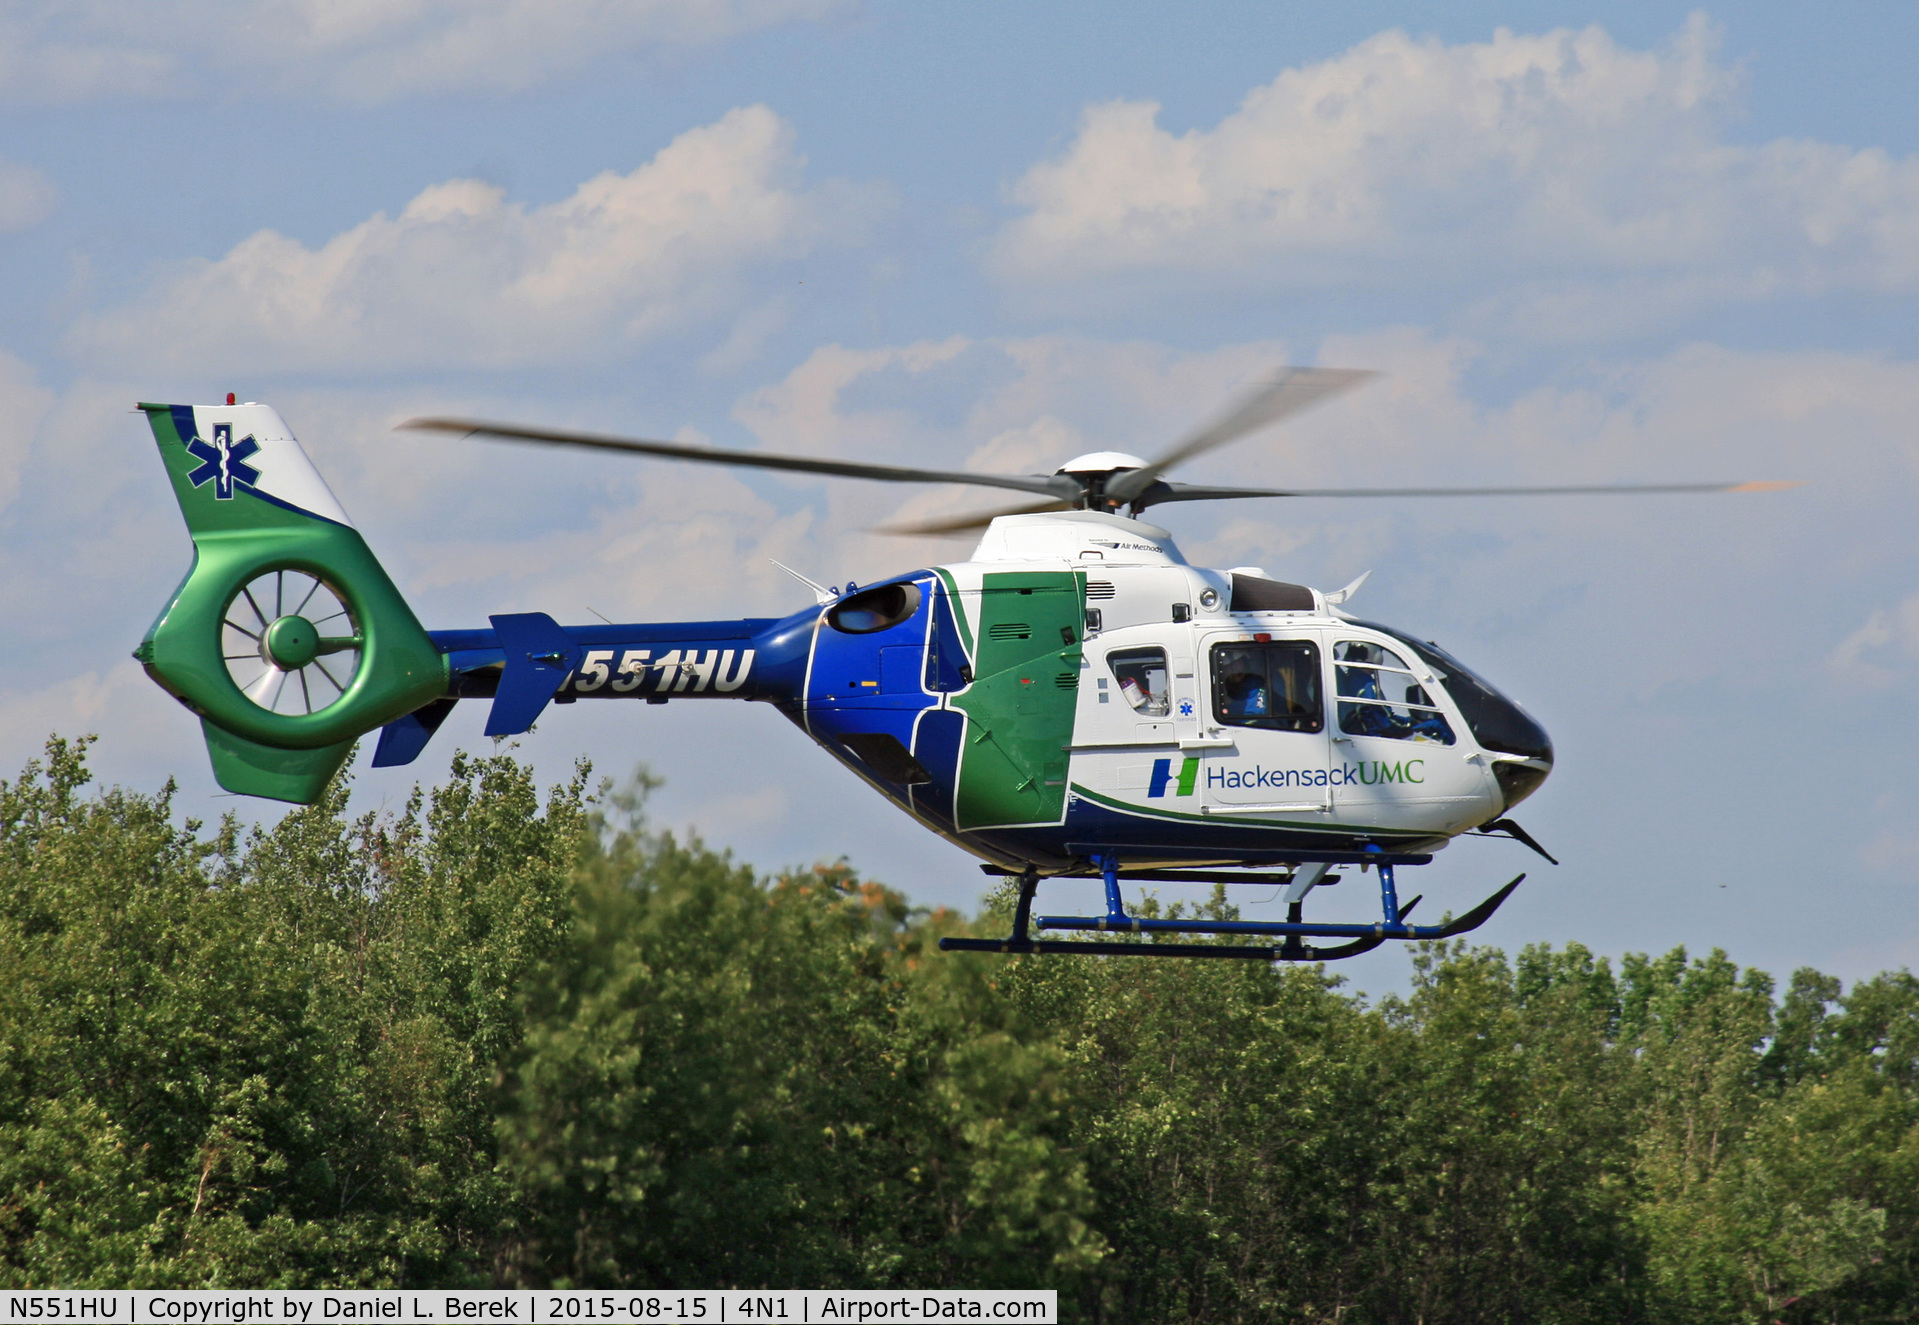 N551HU, 2006 Eurocopter EC-135P-2 C/N 0490, This beauty was visiting the Greenwood Lake Airport airshow in 2015.